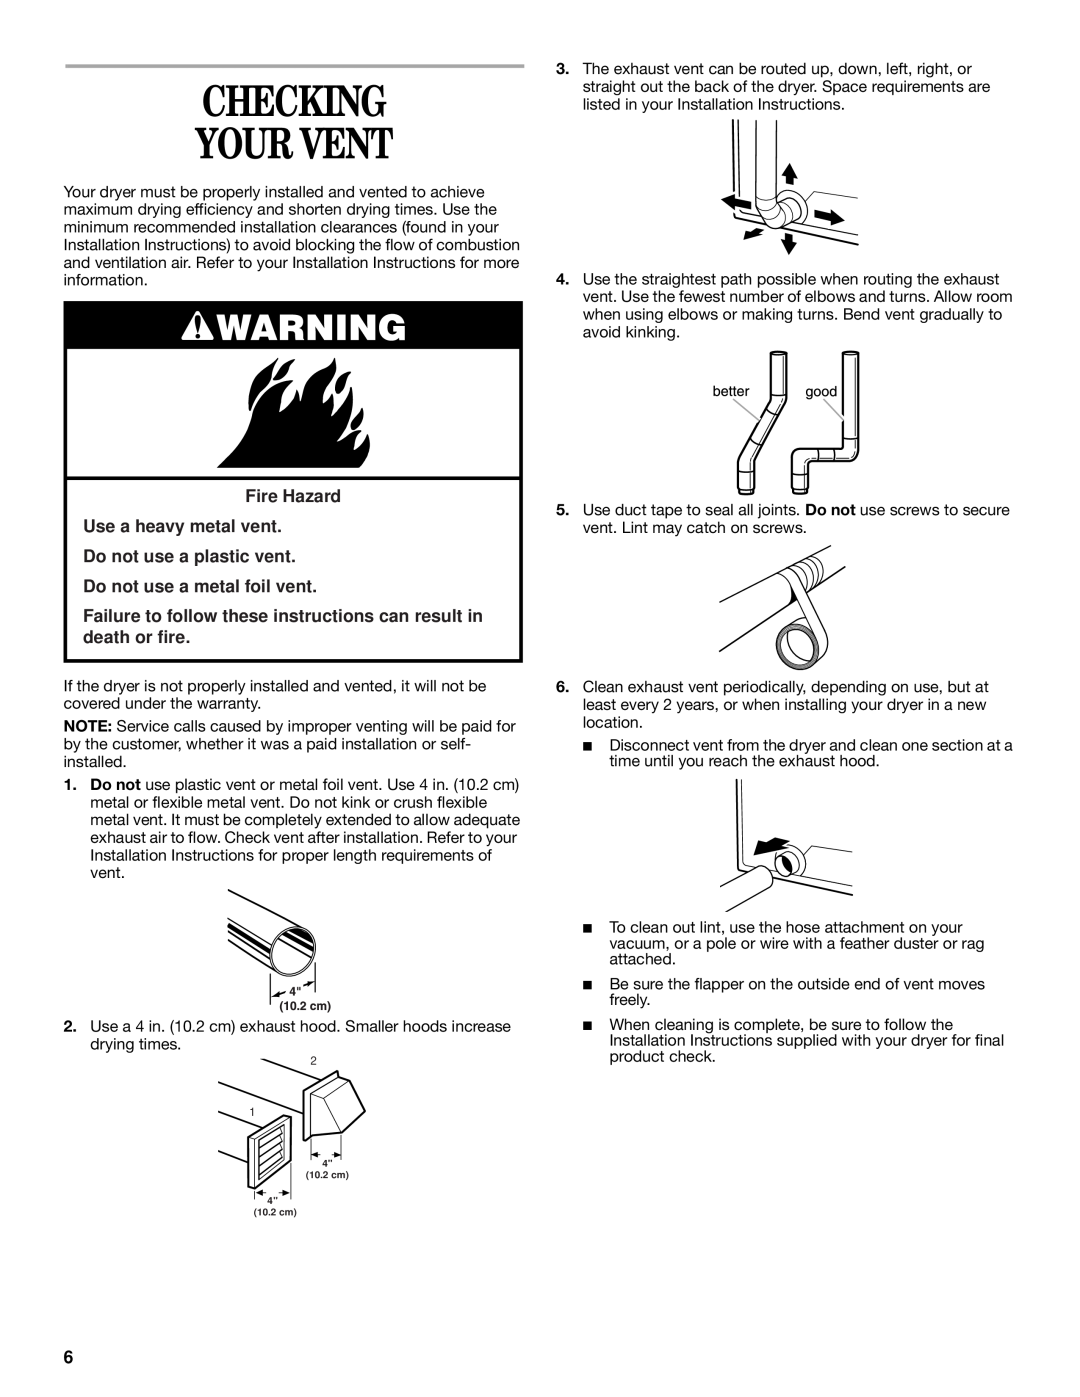 Whirlpool 8529302 manual Checking Your Vent, Fire Hazard Use a heavy metal vent Do not use a plastic vent 